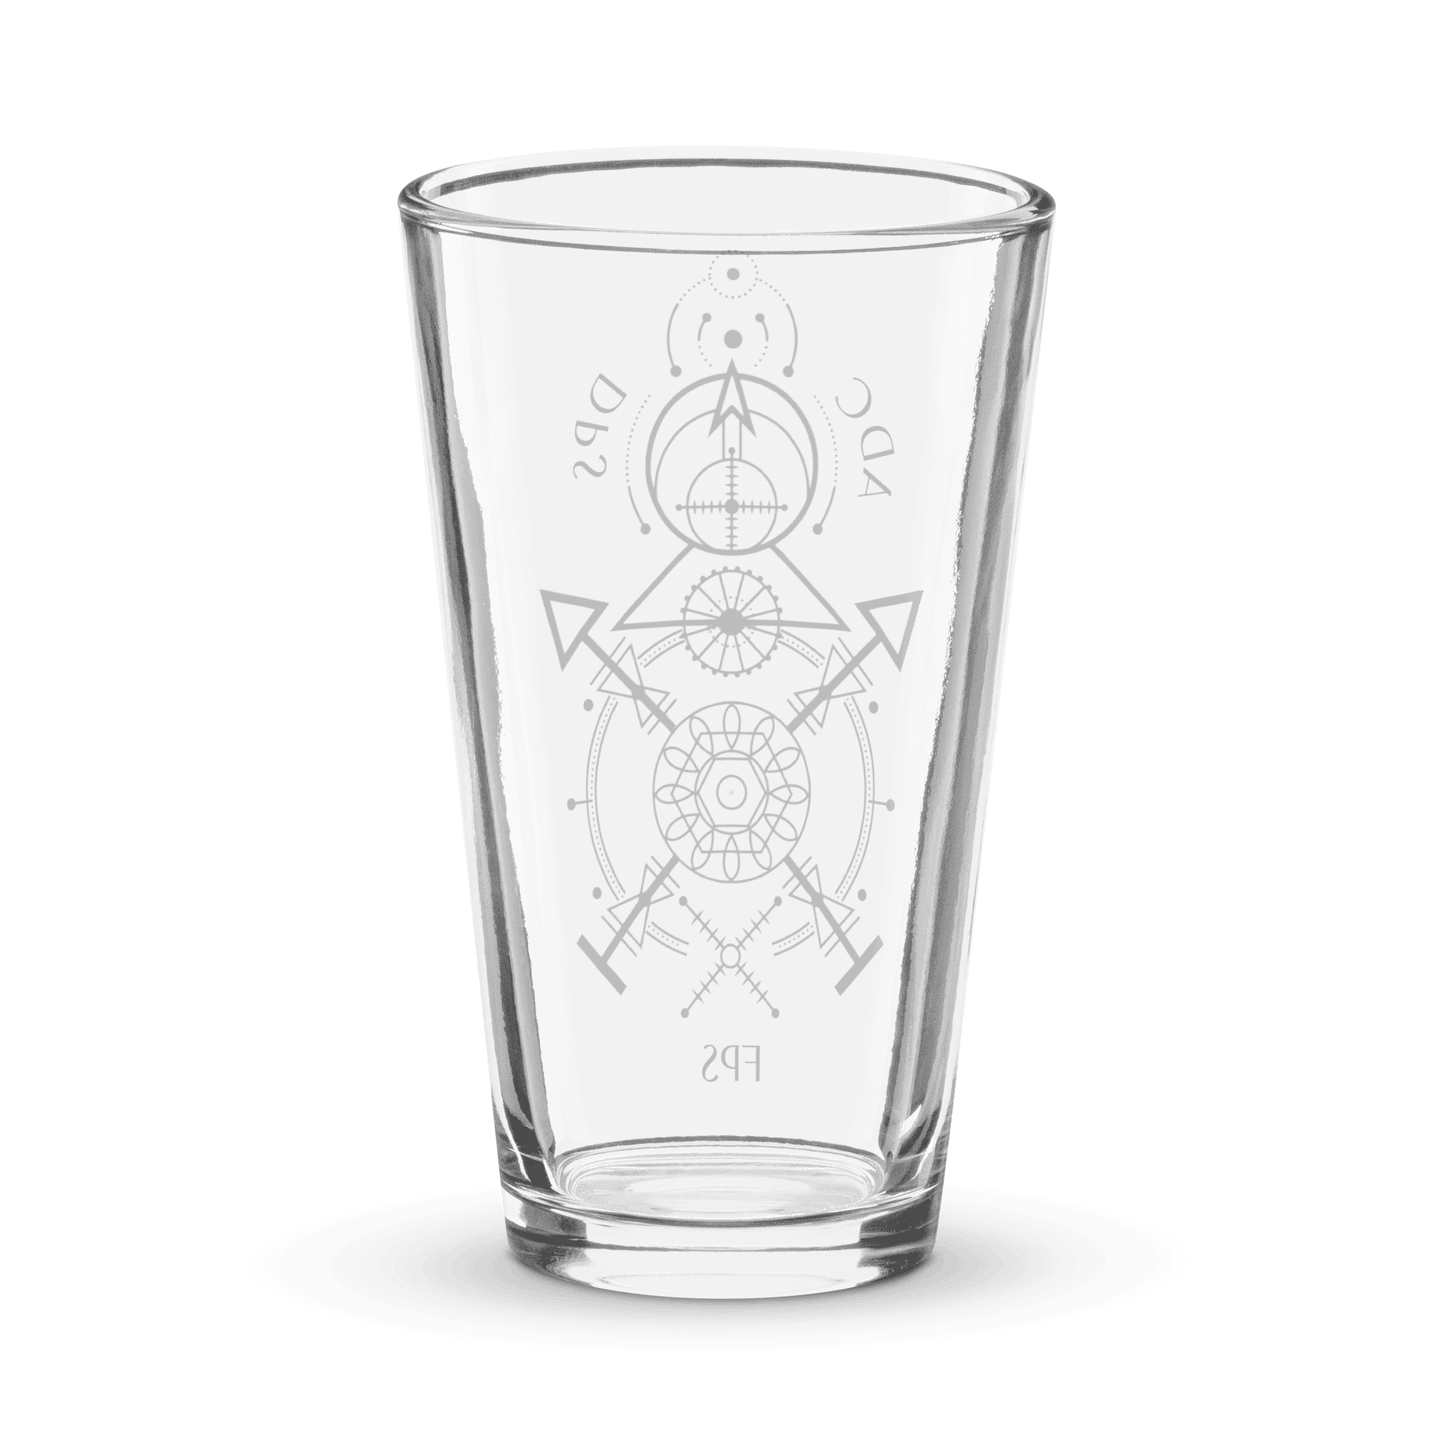 Marksman Shaker Pint Glass for ADC's, DPS'ers, and FPS Fans